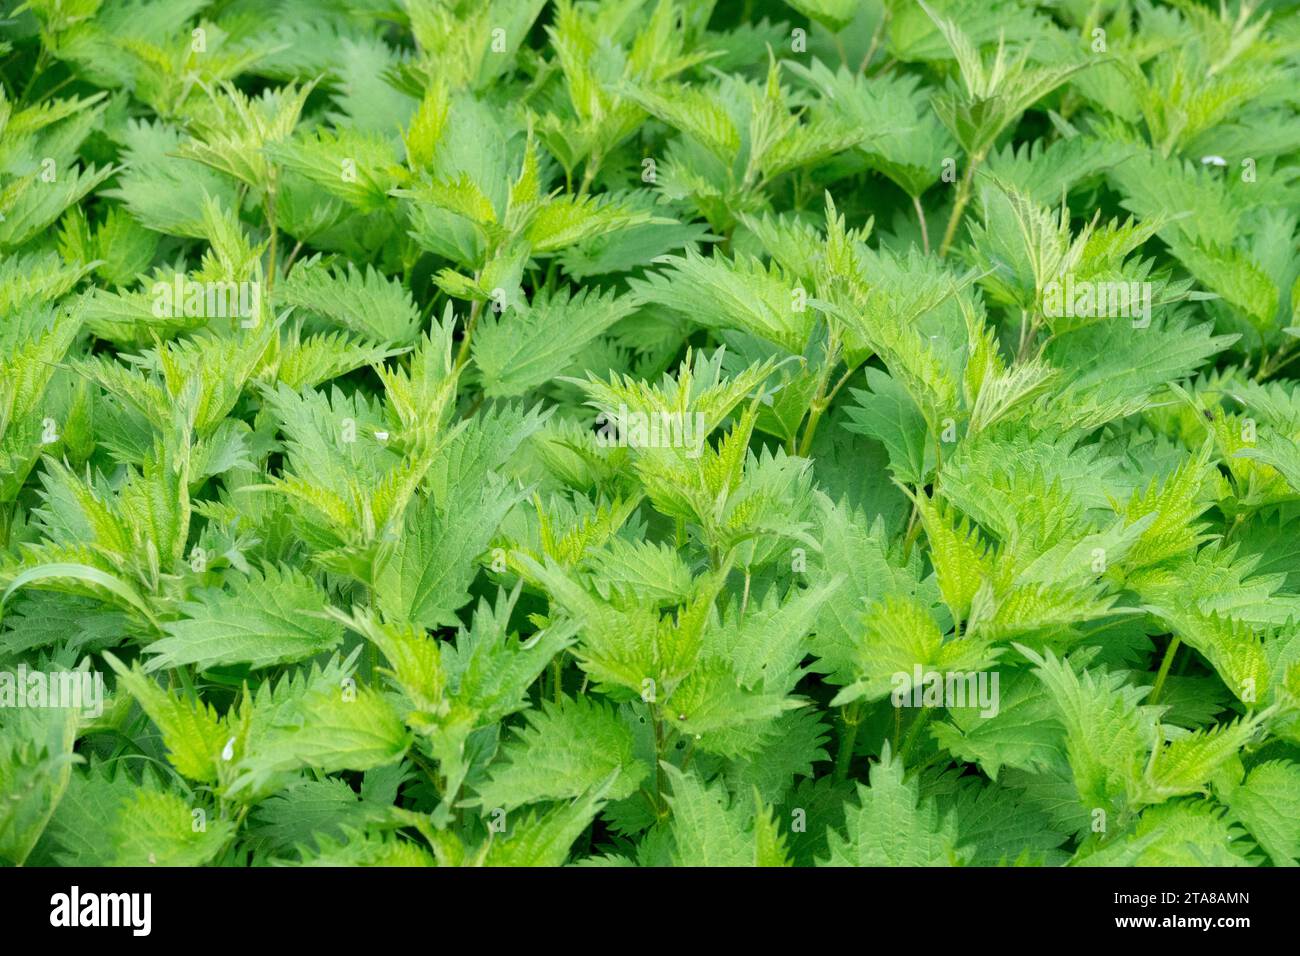 Common nettle, Urtica dioica, Stinging nettle, bright, Green, leaves, Spring, Foliage of plants Stock Photo